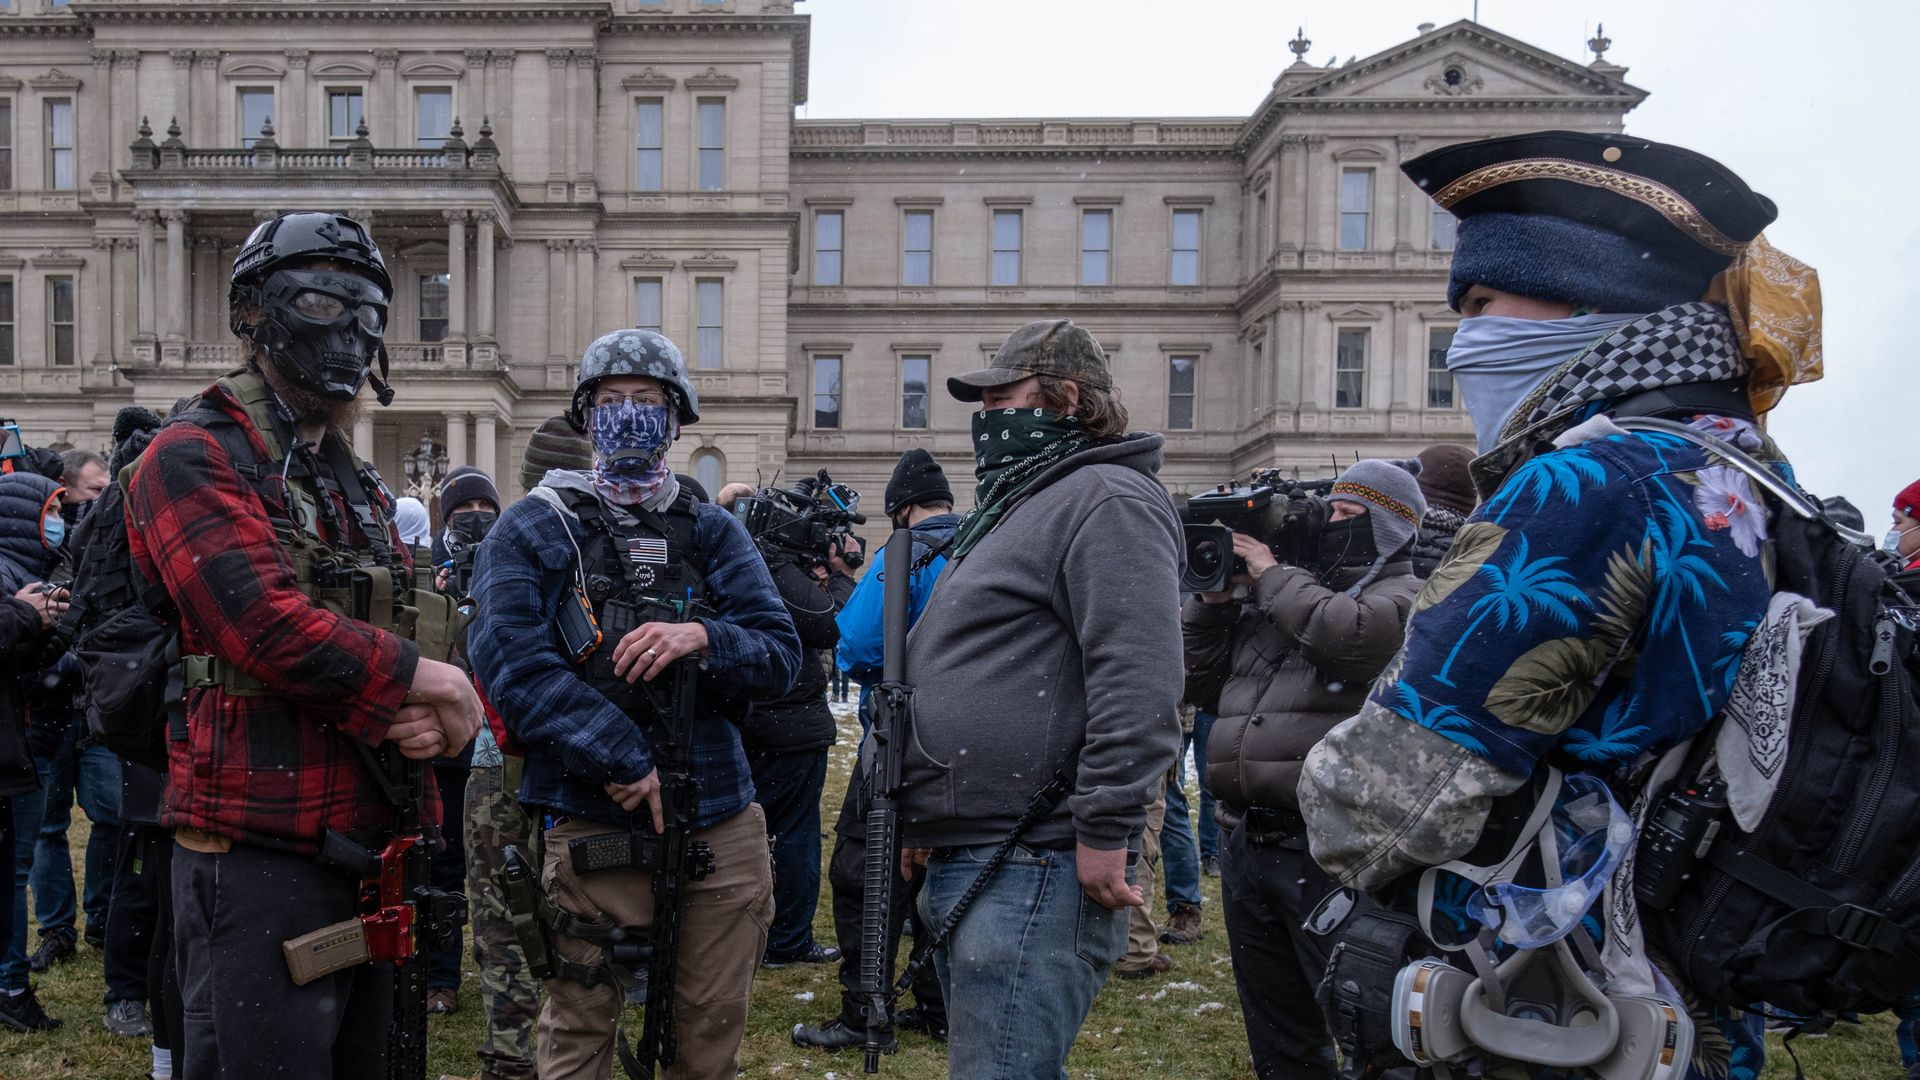 Members of the Michigan Boogaloo Bois an anti-government group stand with their long guns near the Capitol Building in Lansing, Michigan on January 17